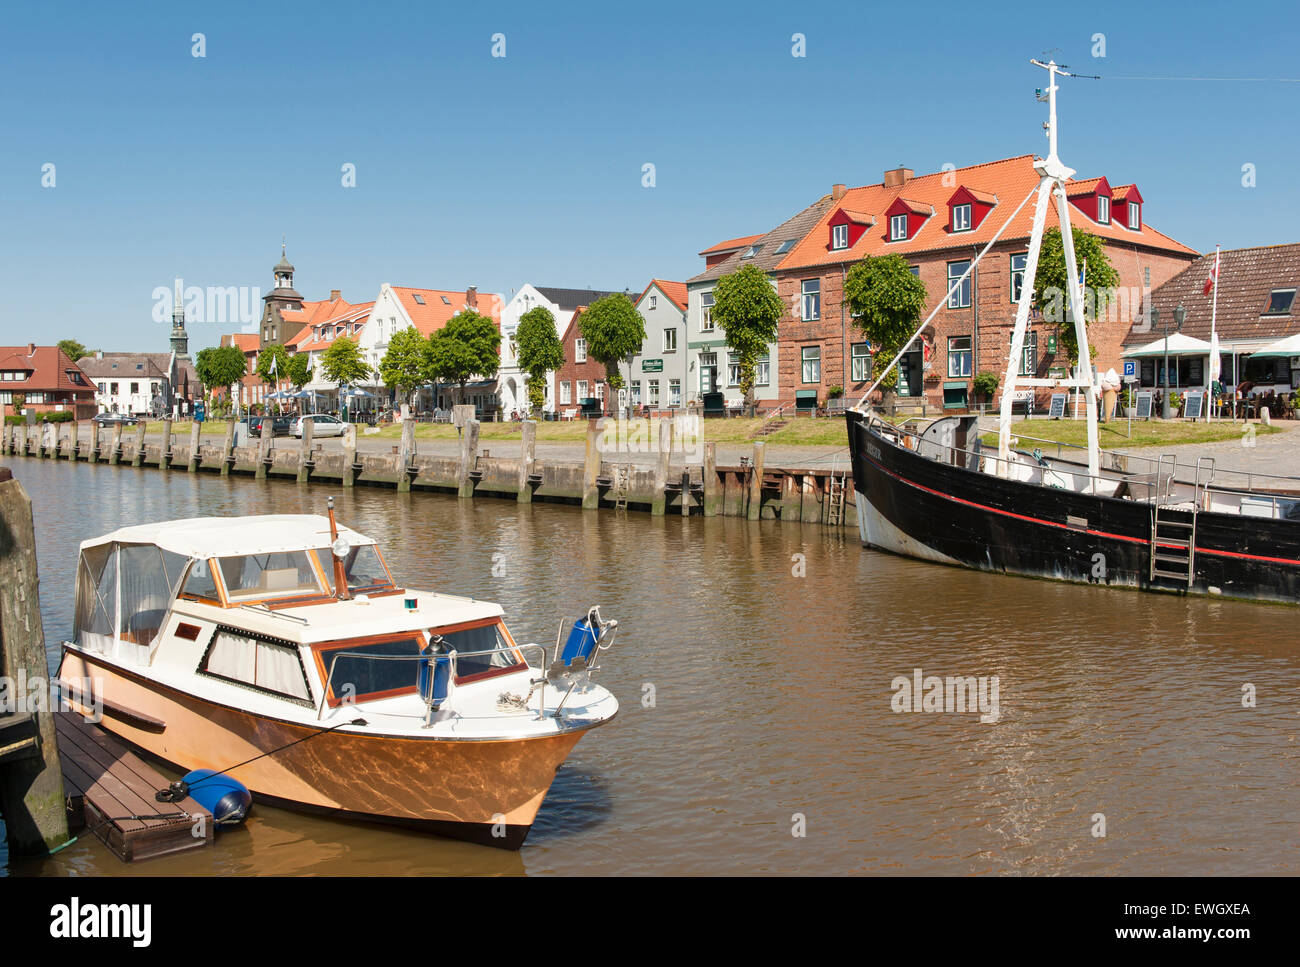 The harbour of Tönning, a small historic town in North Frisia, Germany Stock Photo